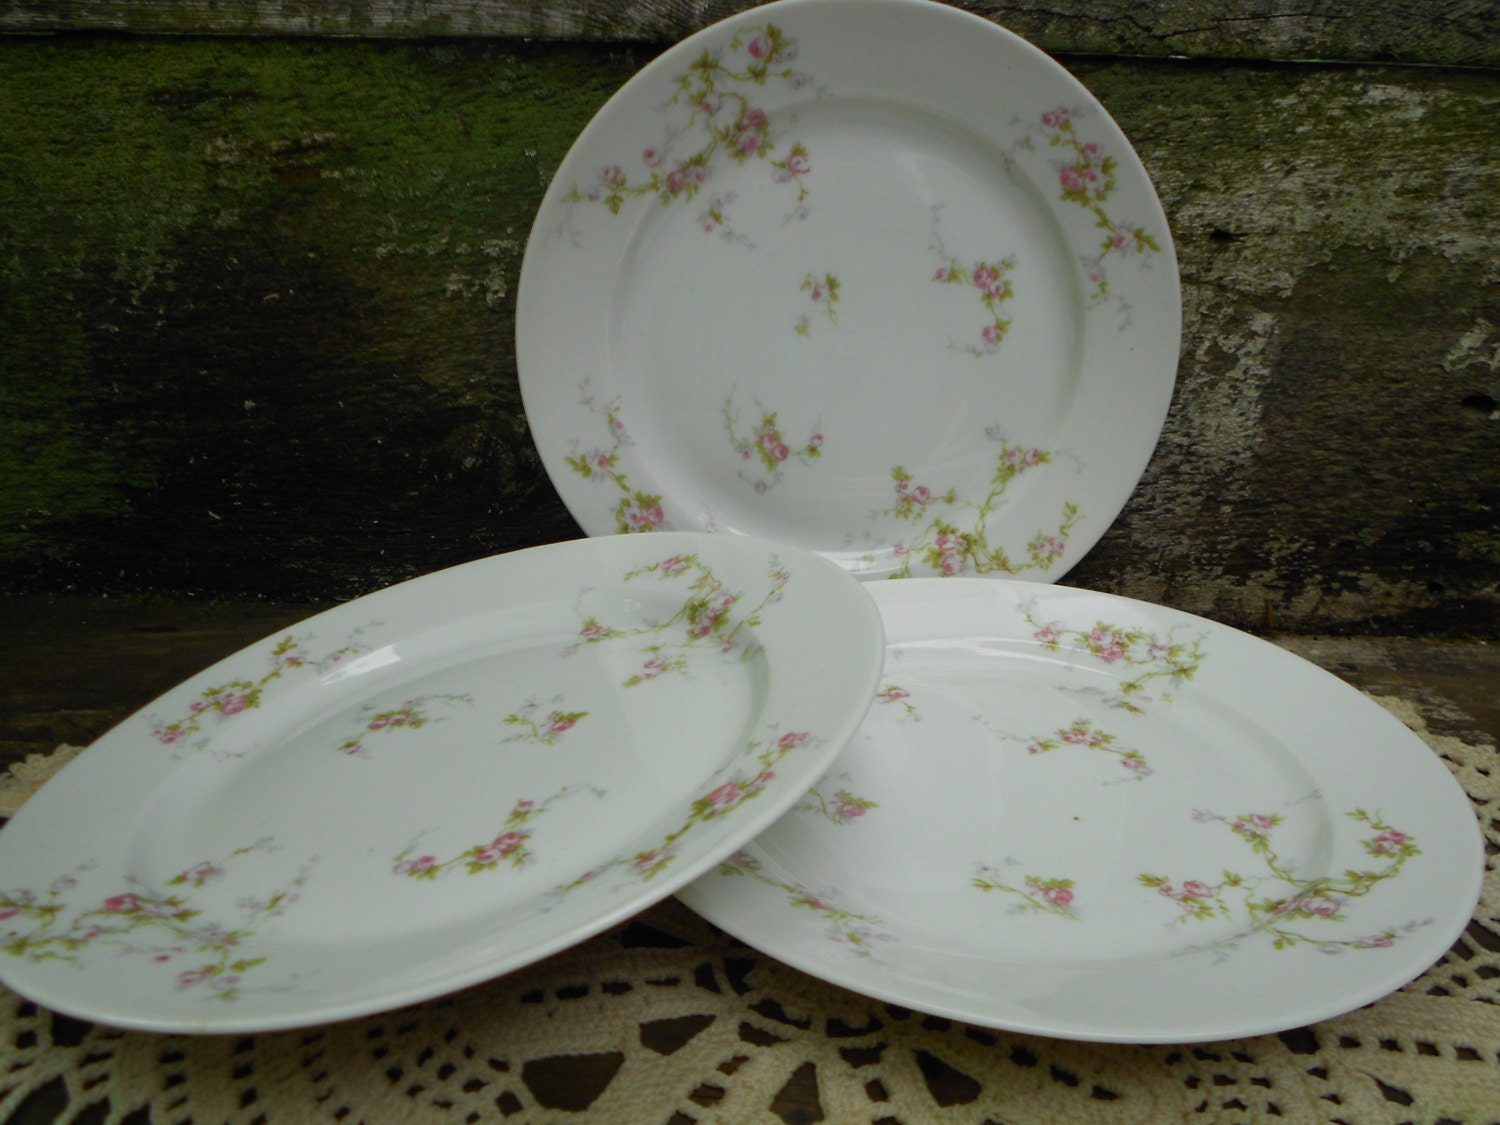 limoges dishes